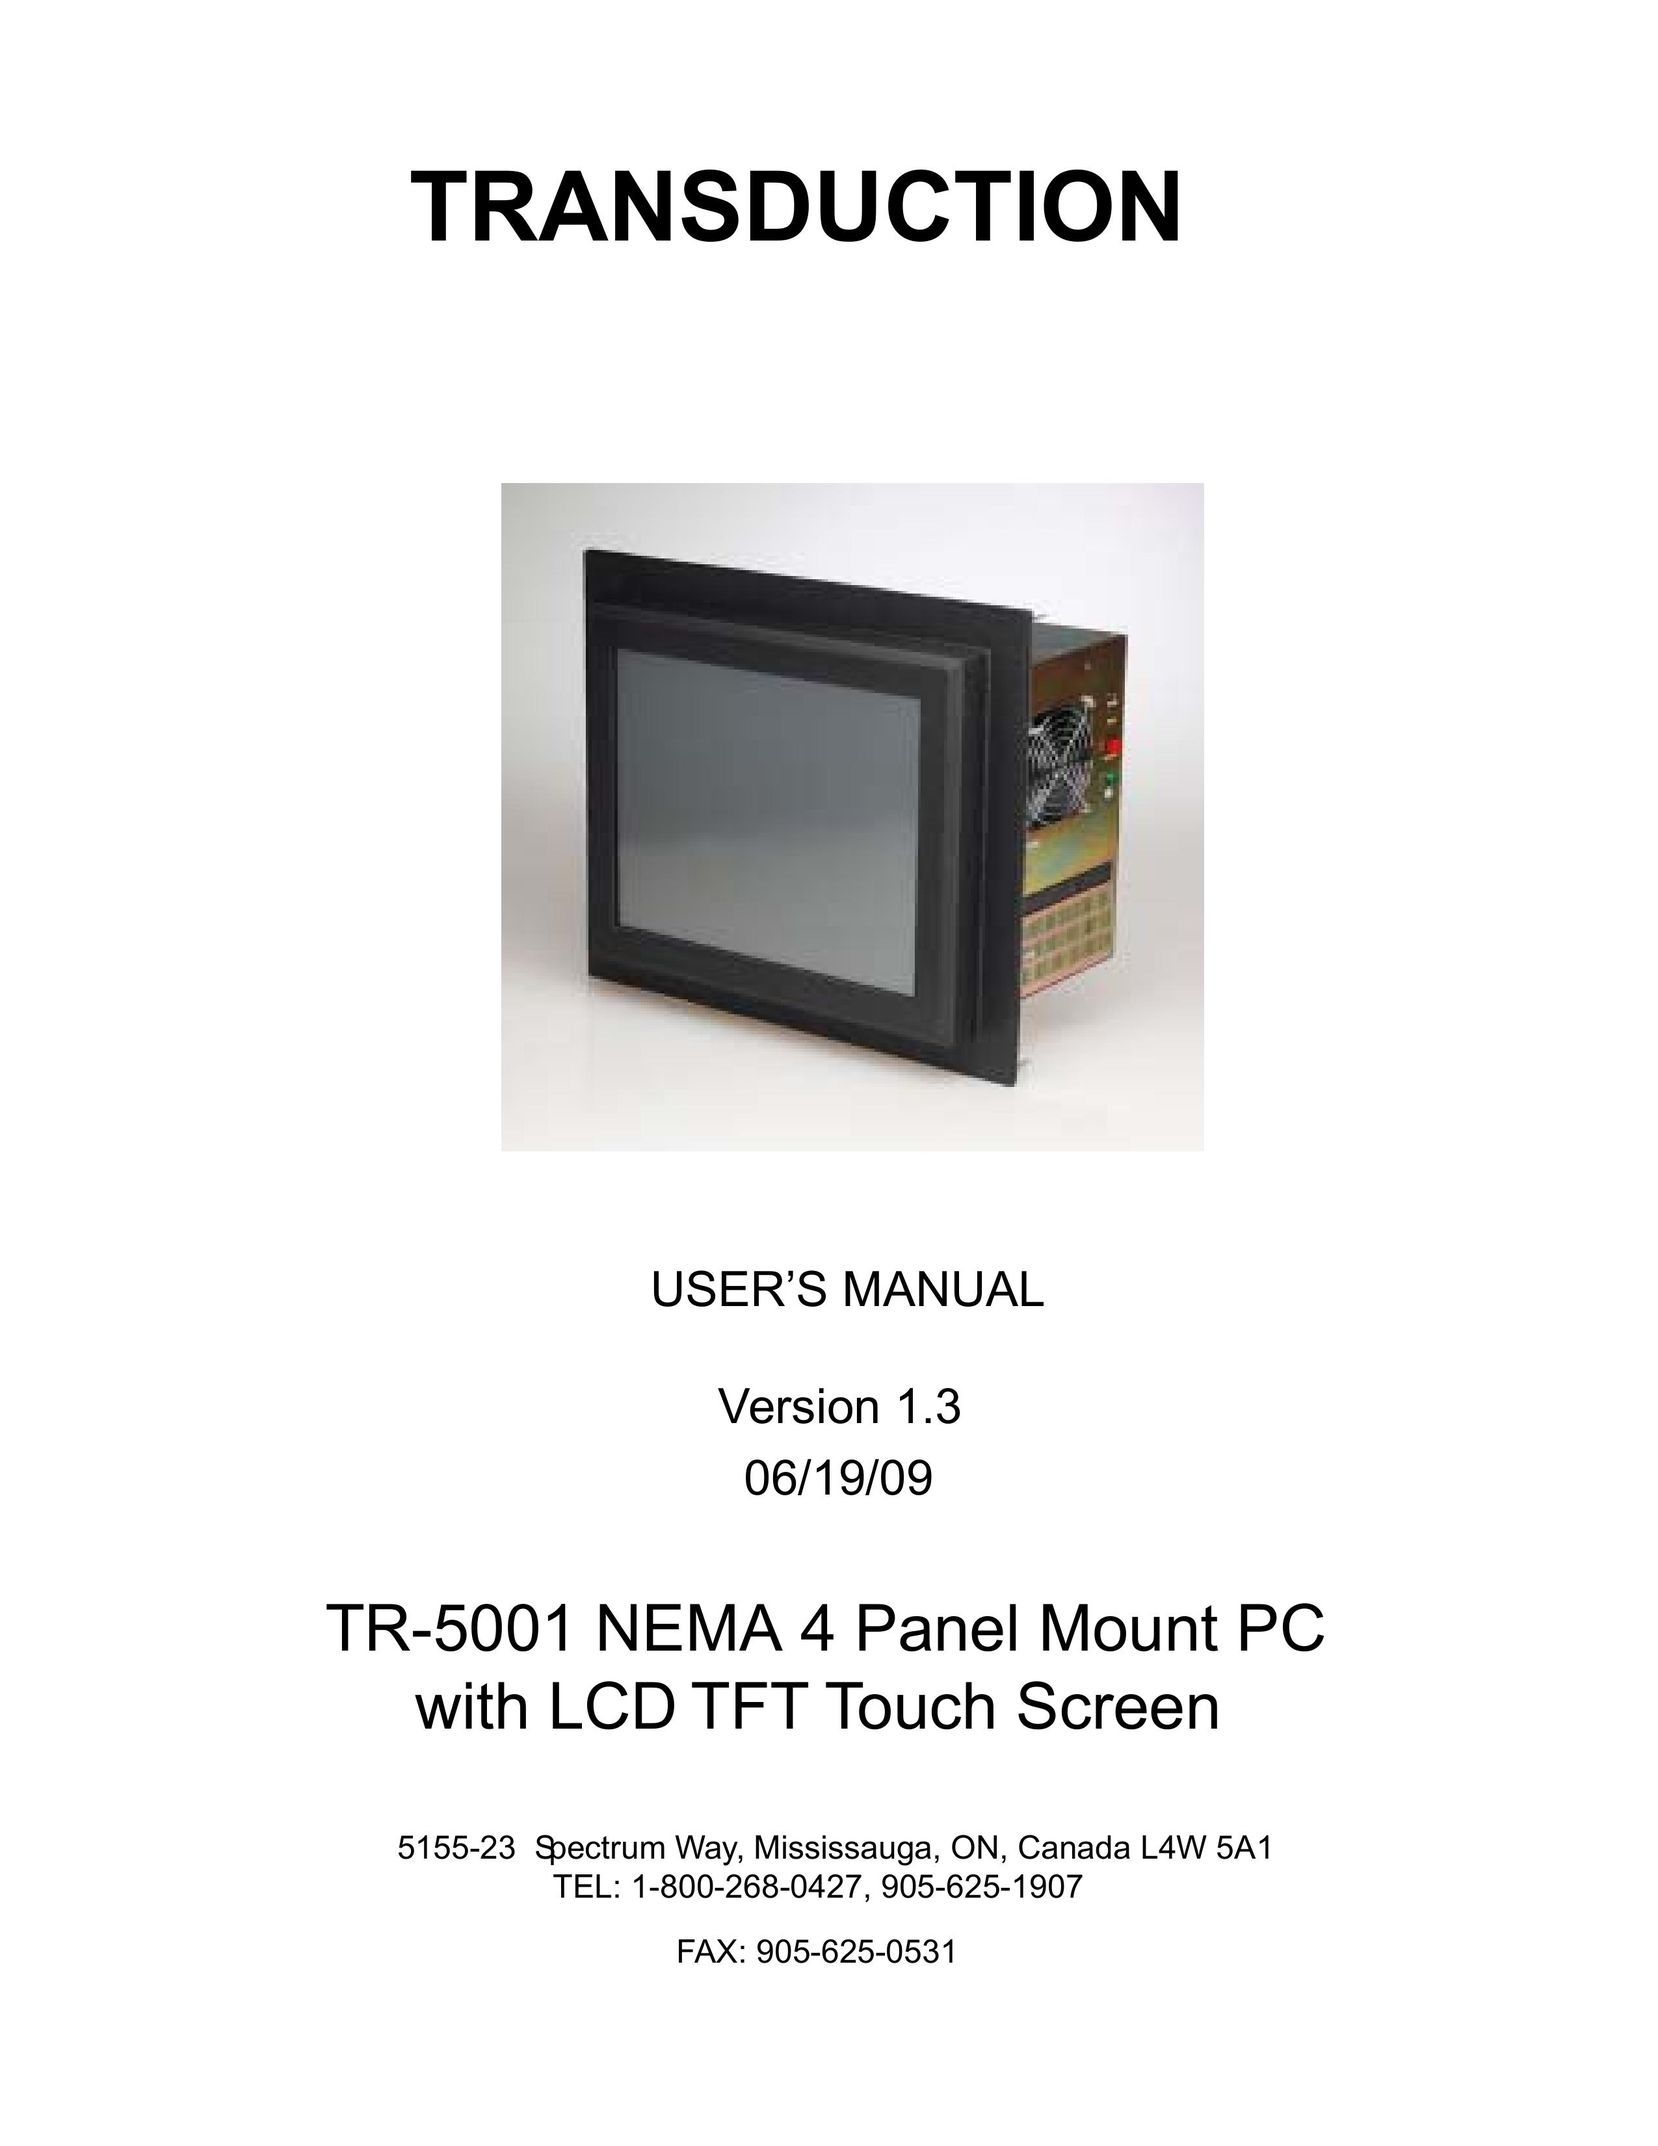 New Transducers TR-5001 Computer Monitor User Manual